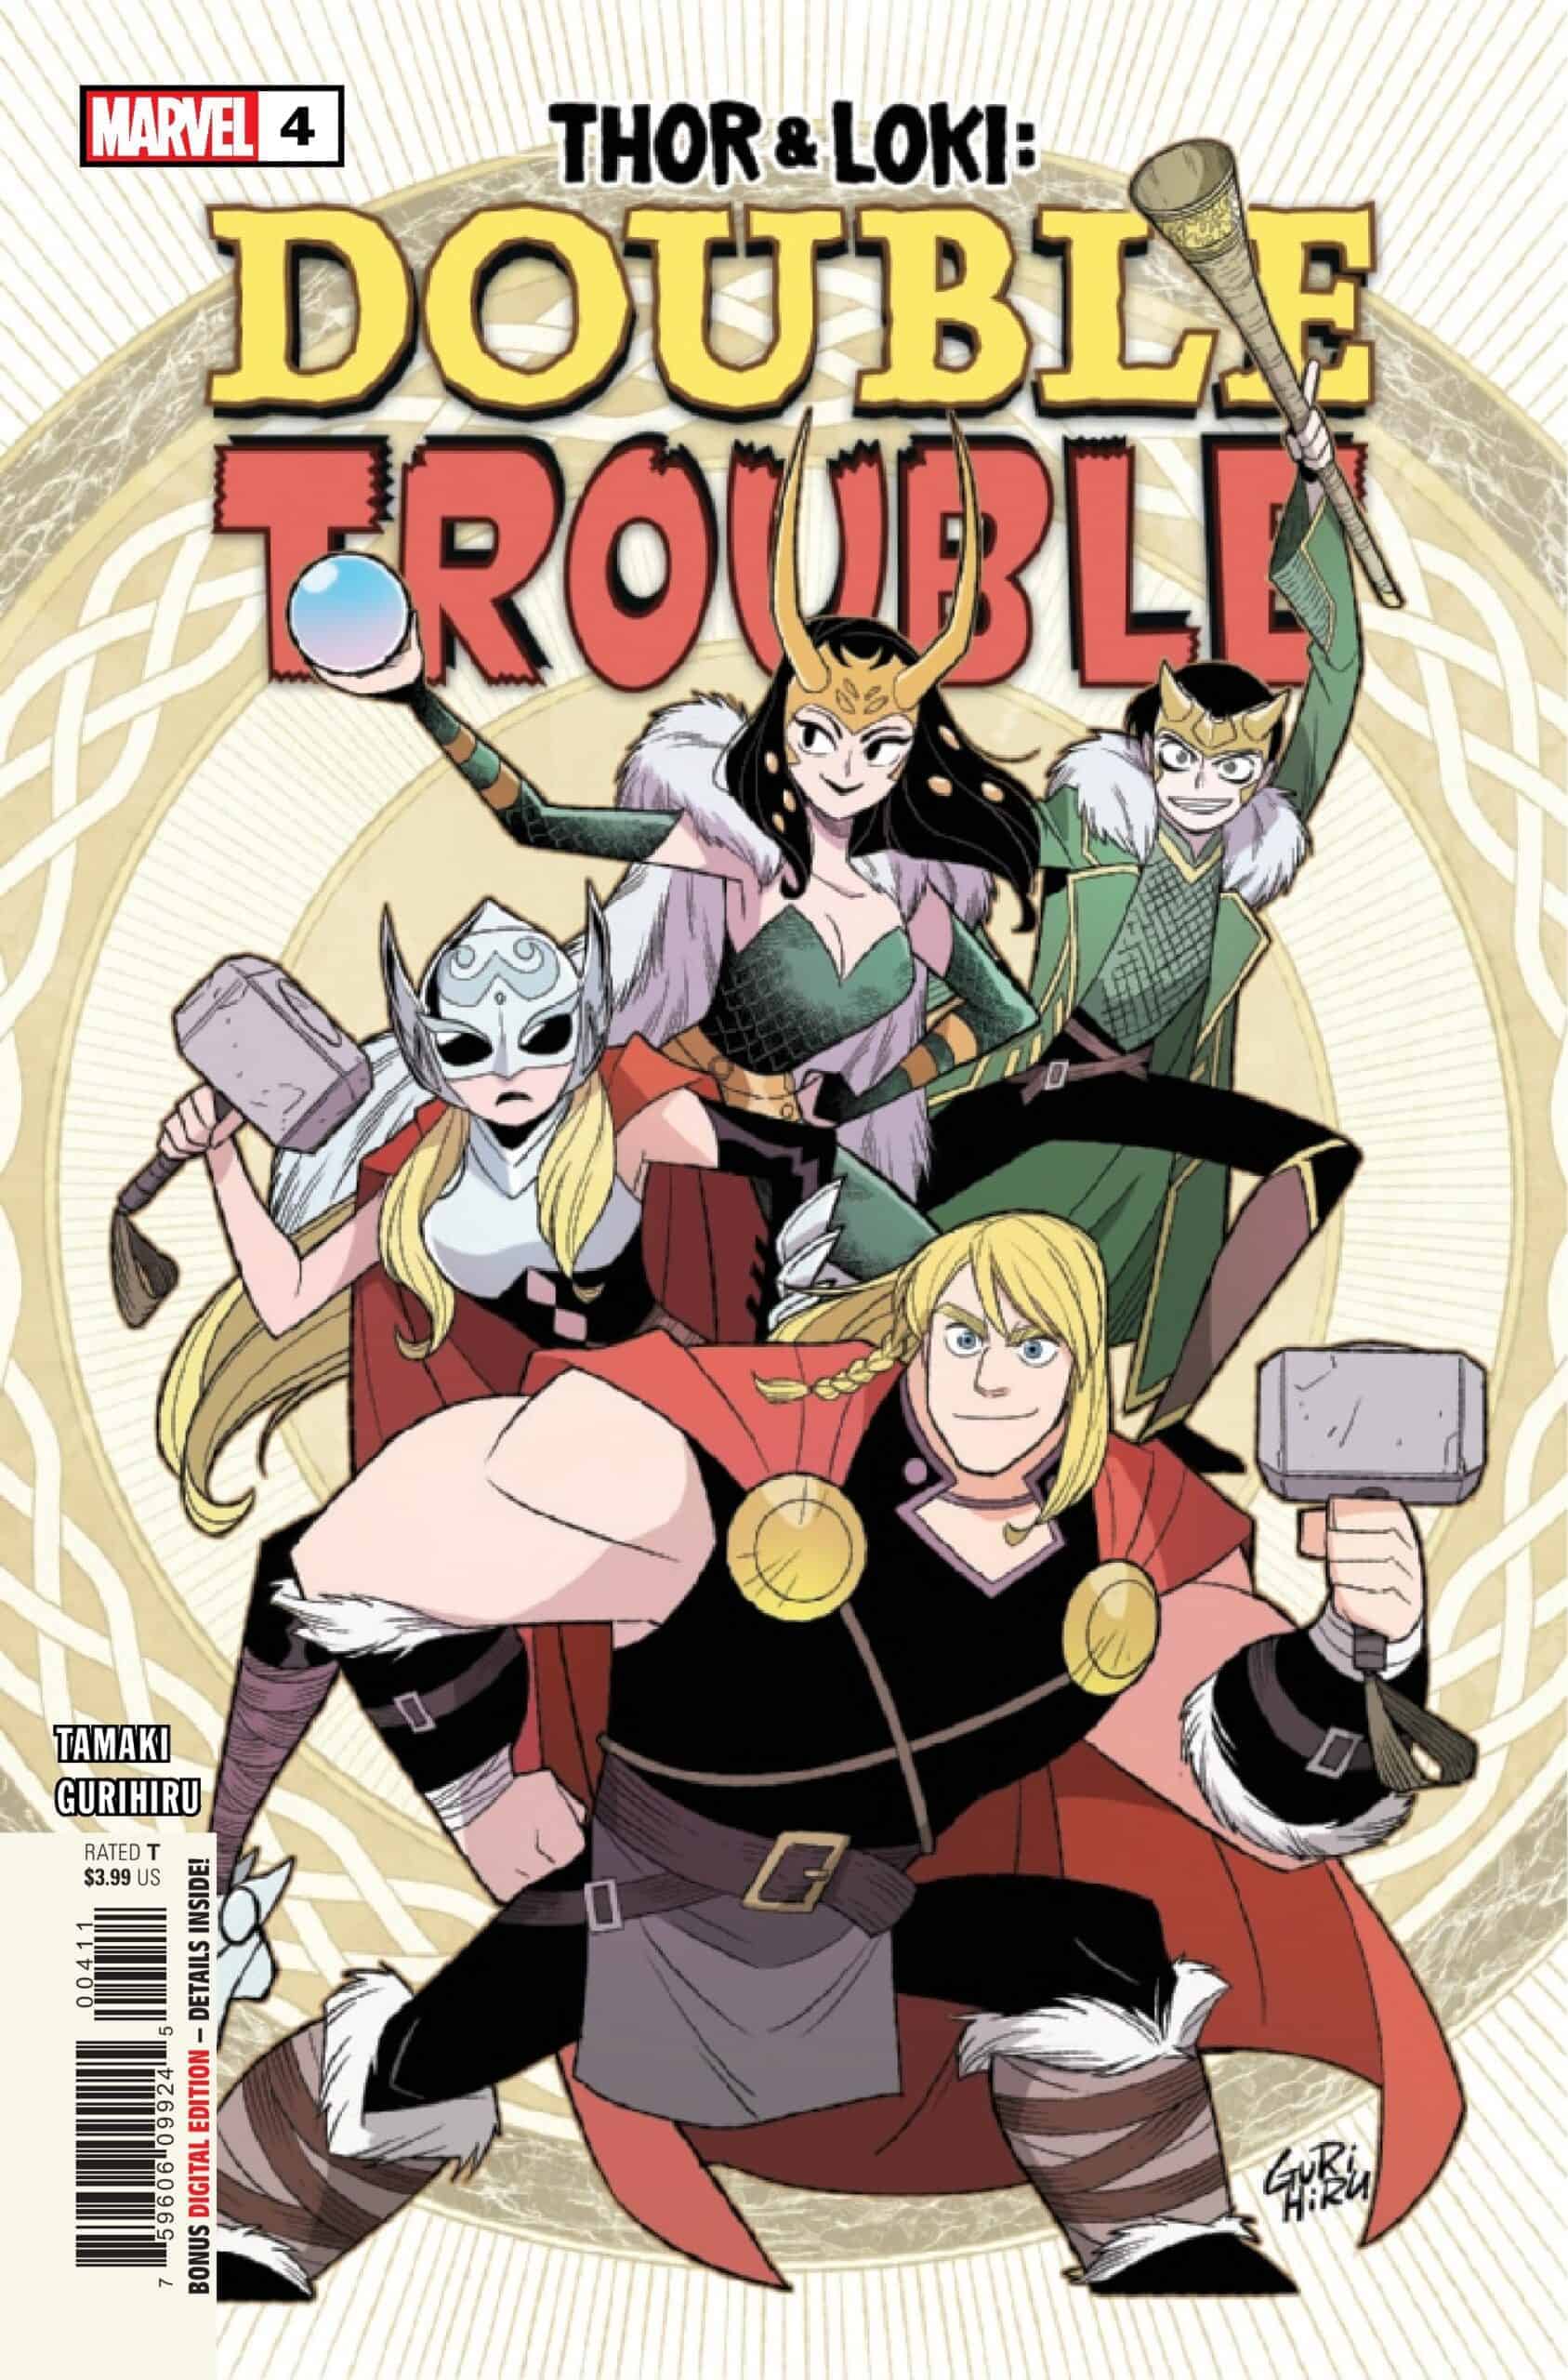 Thor and Loki: Double Trouble #4: More Lokis, More Problems (SPOILER-FREE  ADVANCED REVIEW) - Comic Watch